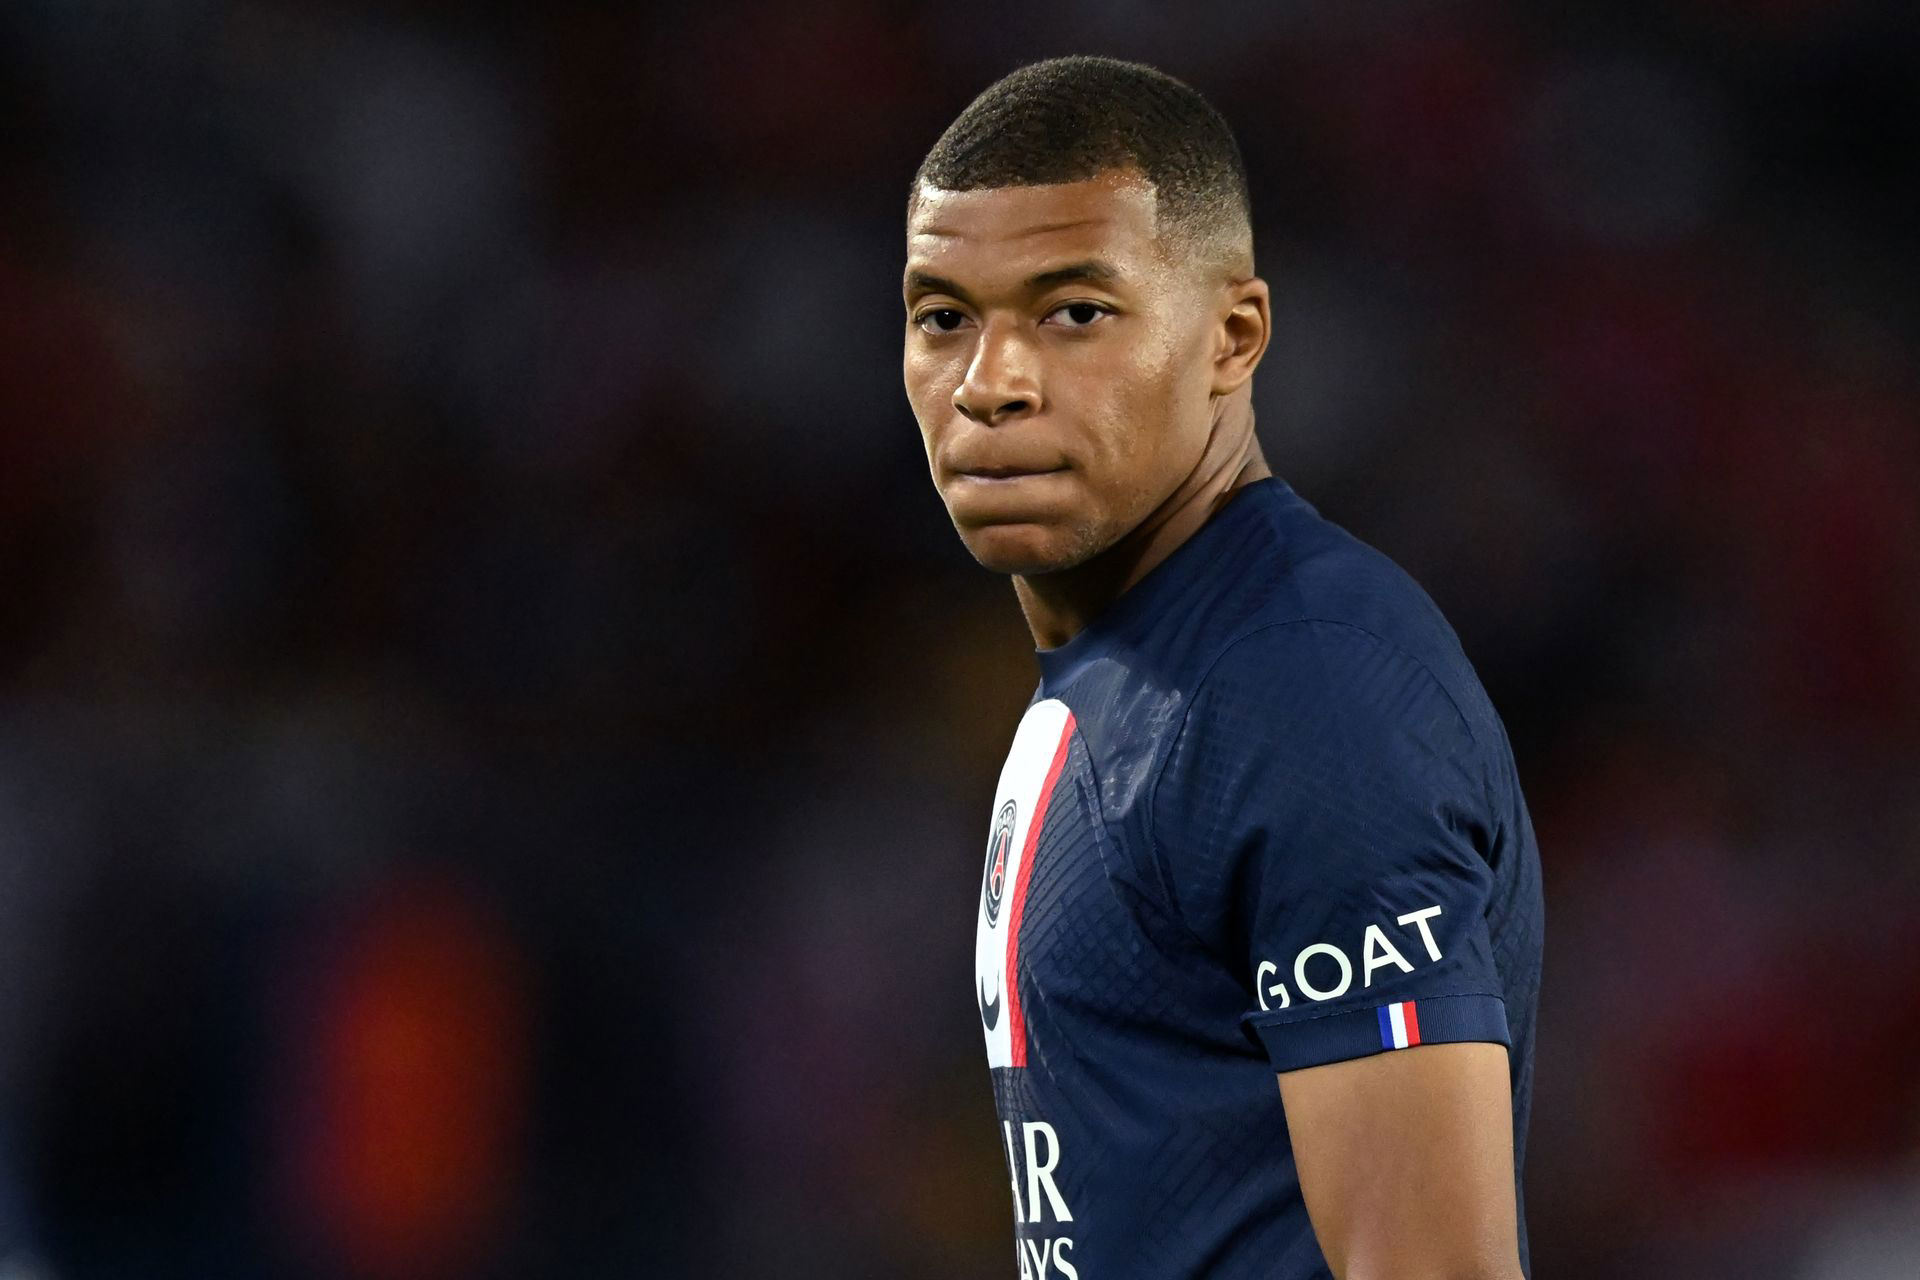 PSG to sell Mbappe – which big money club will claim the superstar?